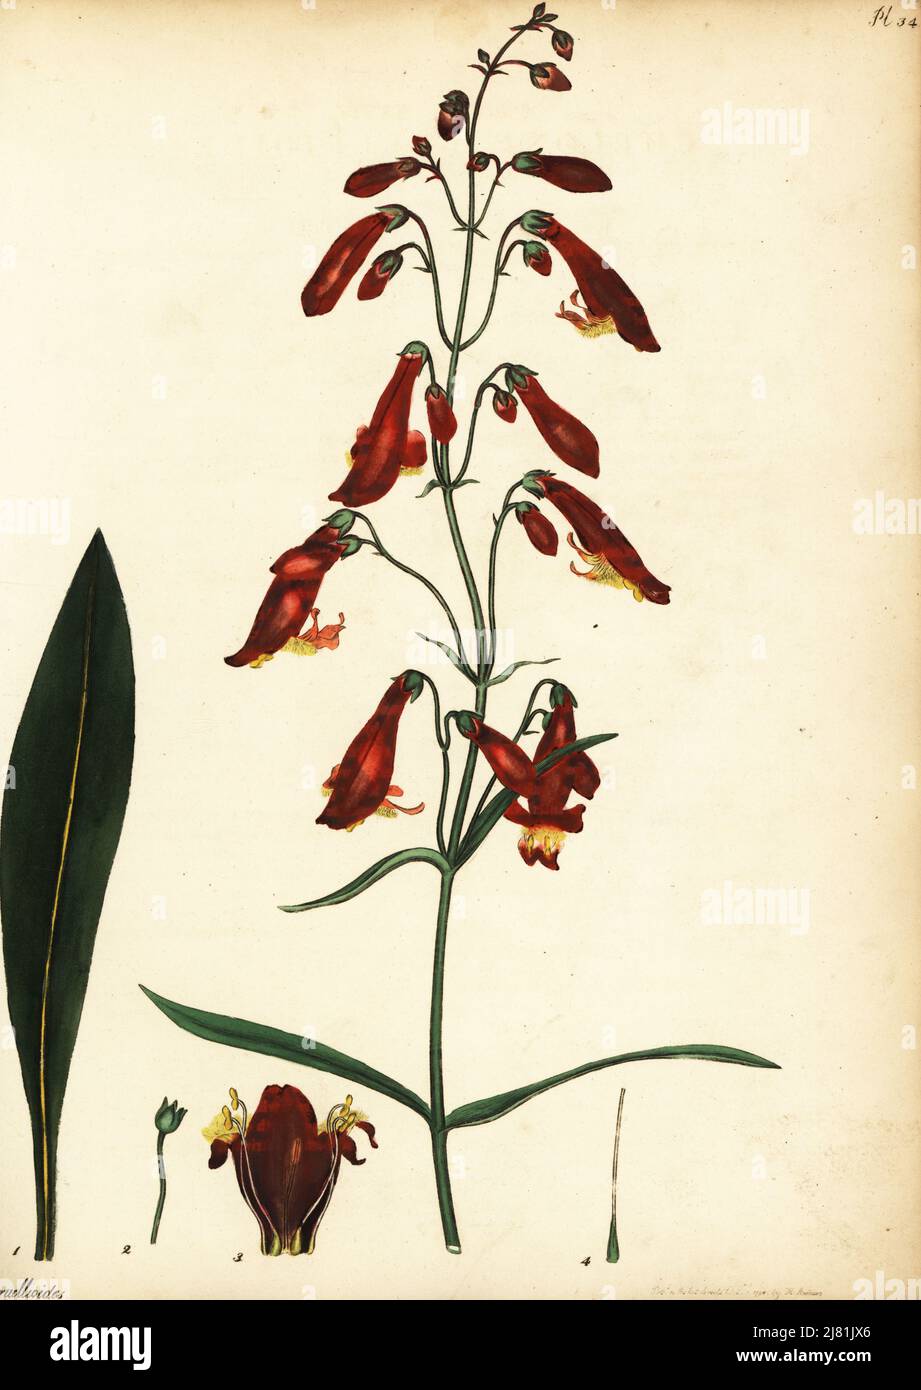 Ourisia ruellioides. Scarlet chelone, Chelone ruellioides. Copperplate engraving drawn, engraved and hand-coloured by Henry Andrews from his Botanical Register, Volume 1, published in London, 1799. Stock Photo